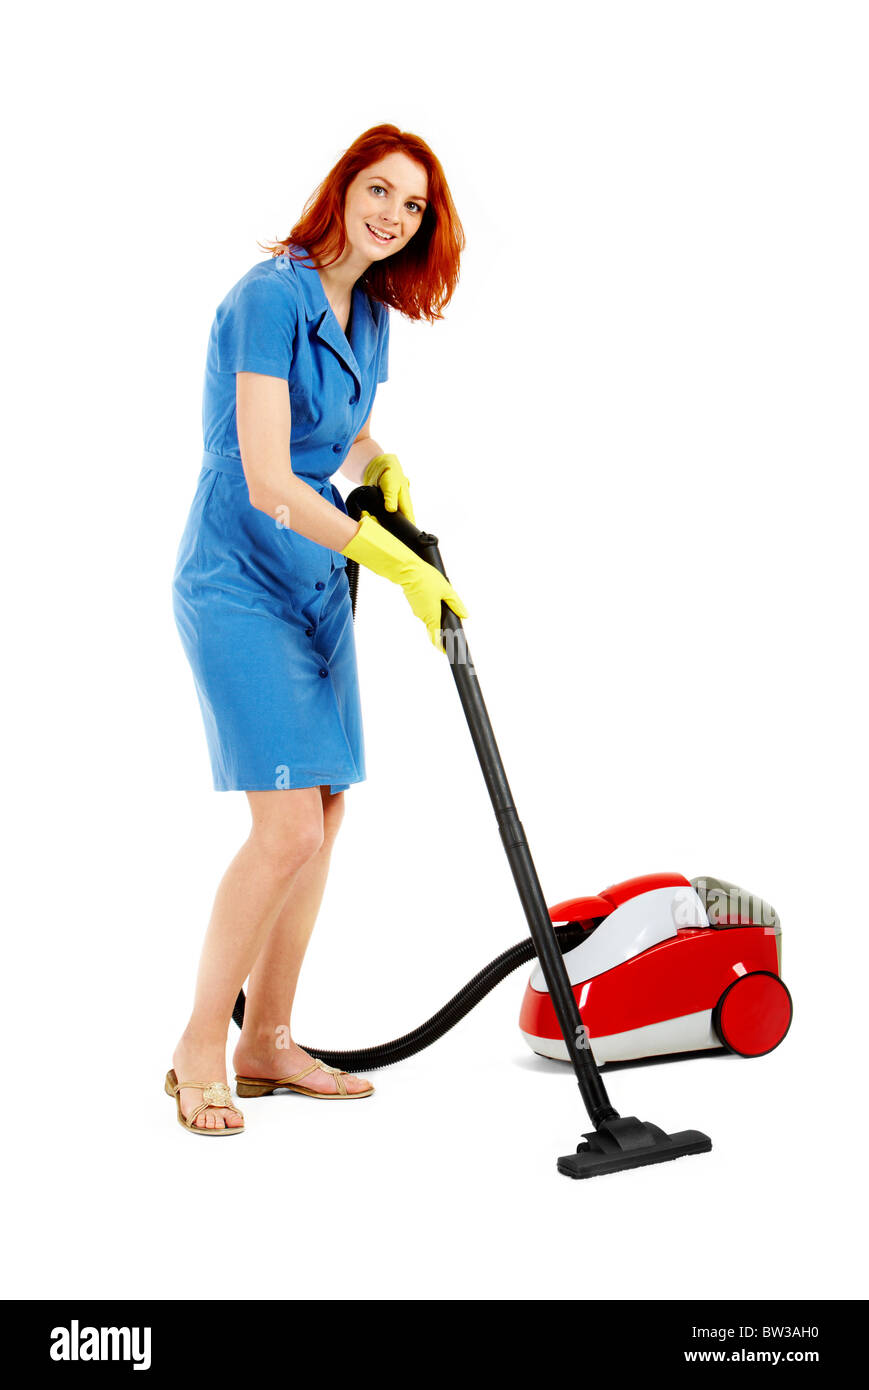 Portrait of nice housewife doing housework with vacuum cleaner Stock Photo